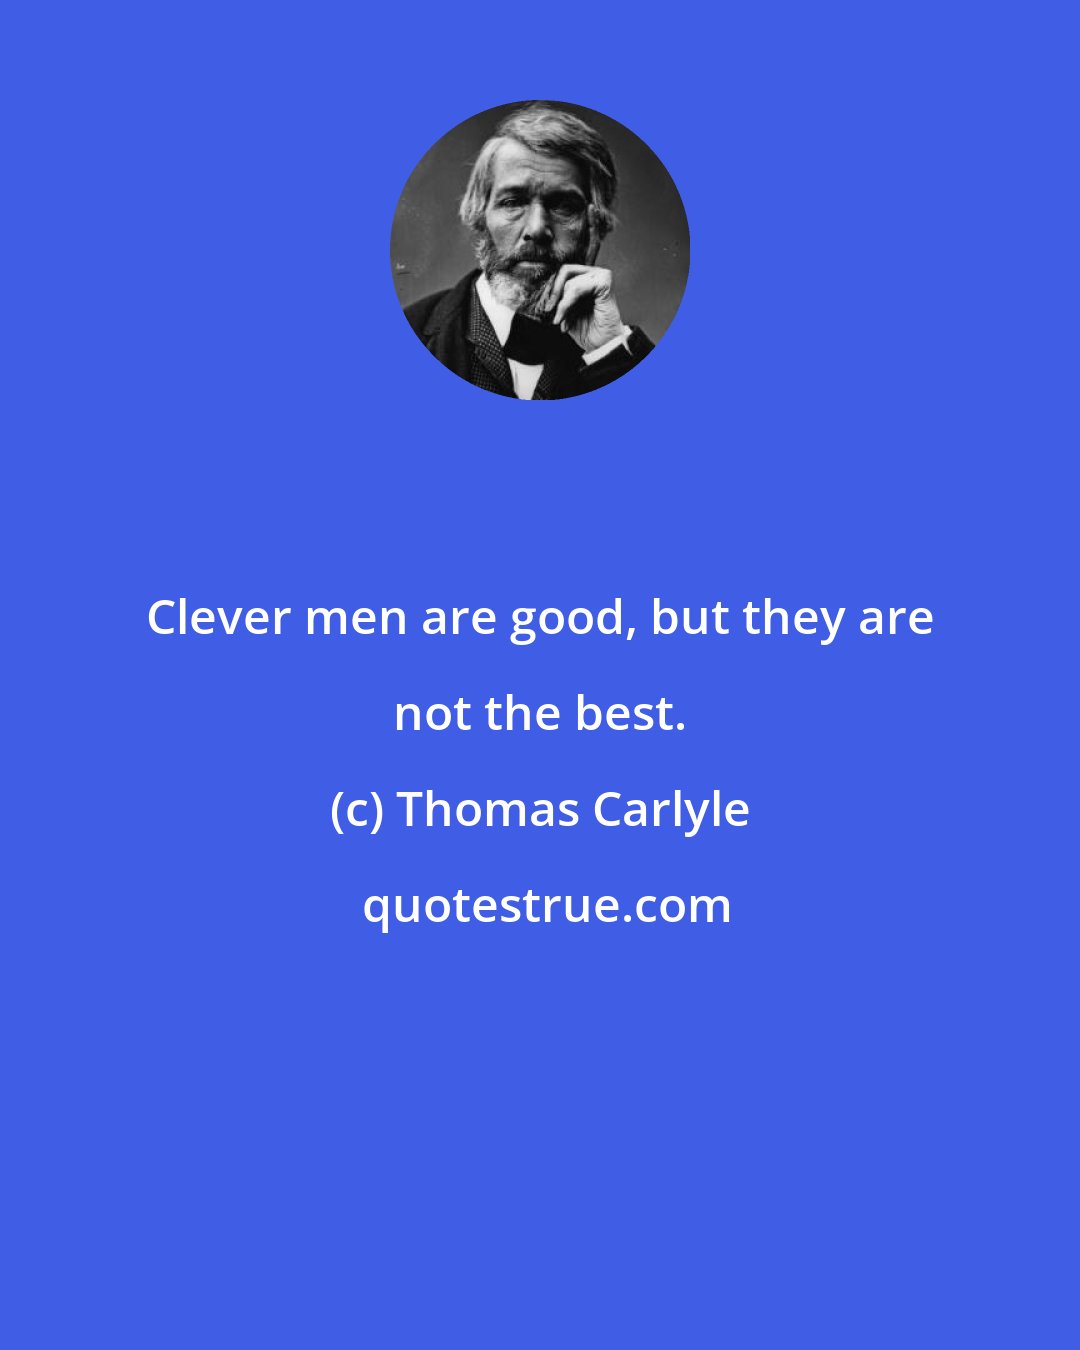 Thomas Carlyle: Clever men are good, but they are not the best.